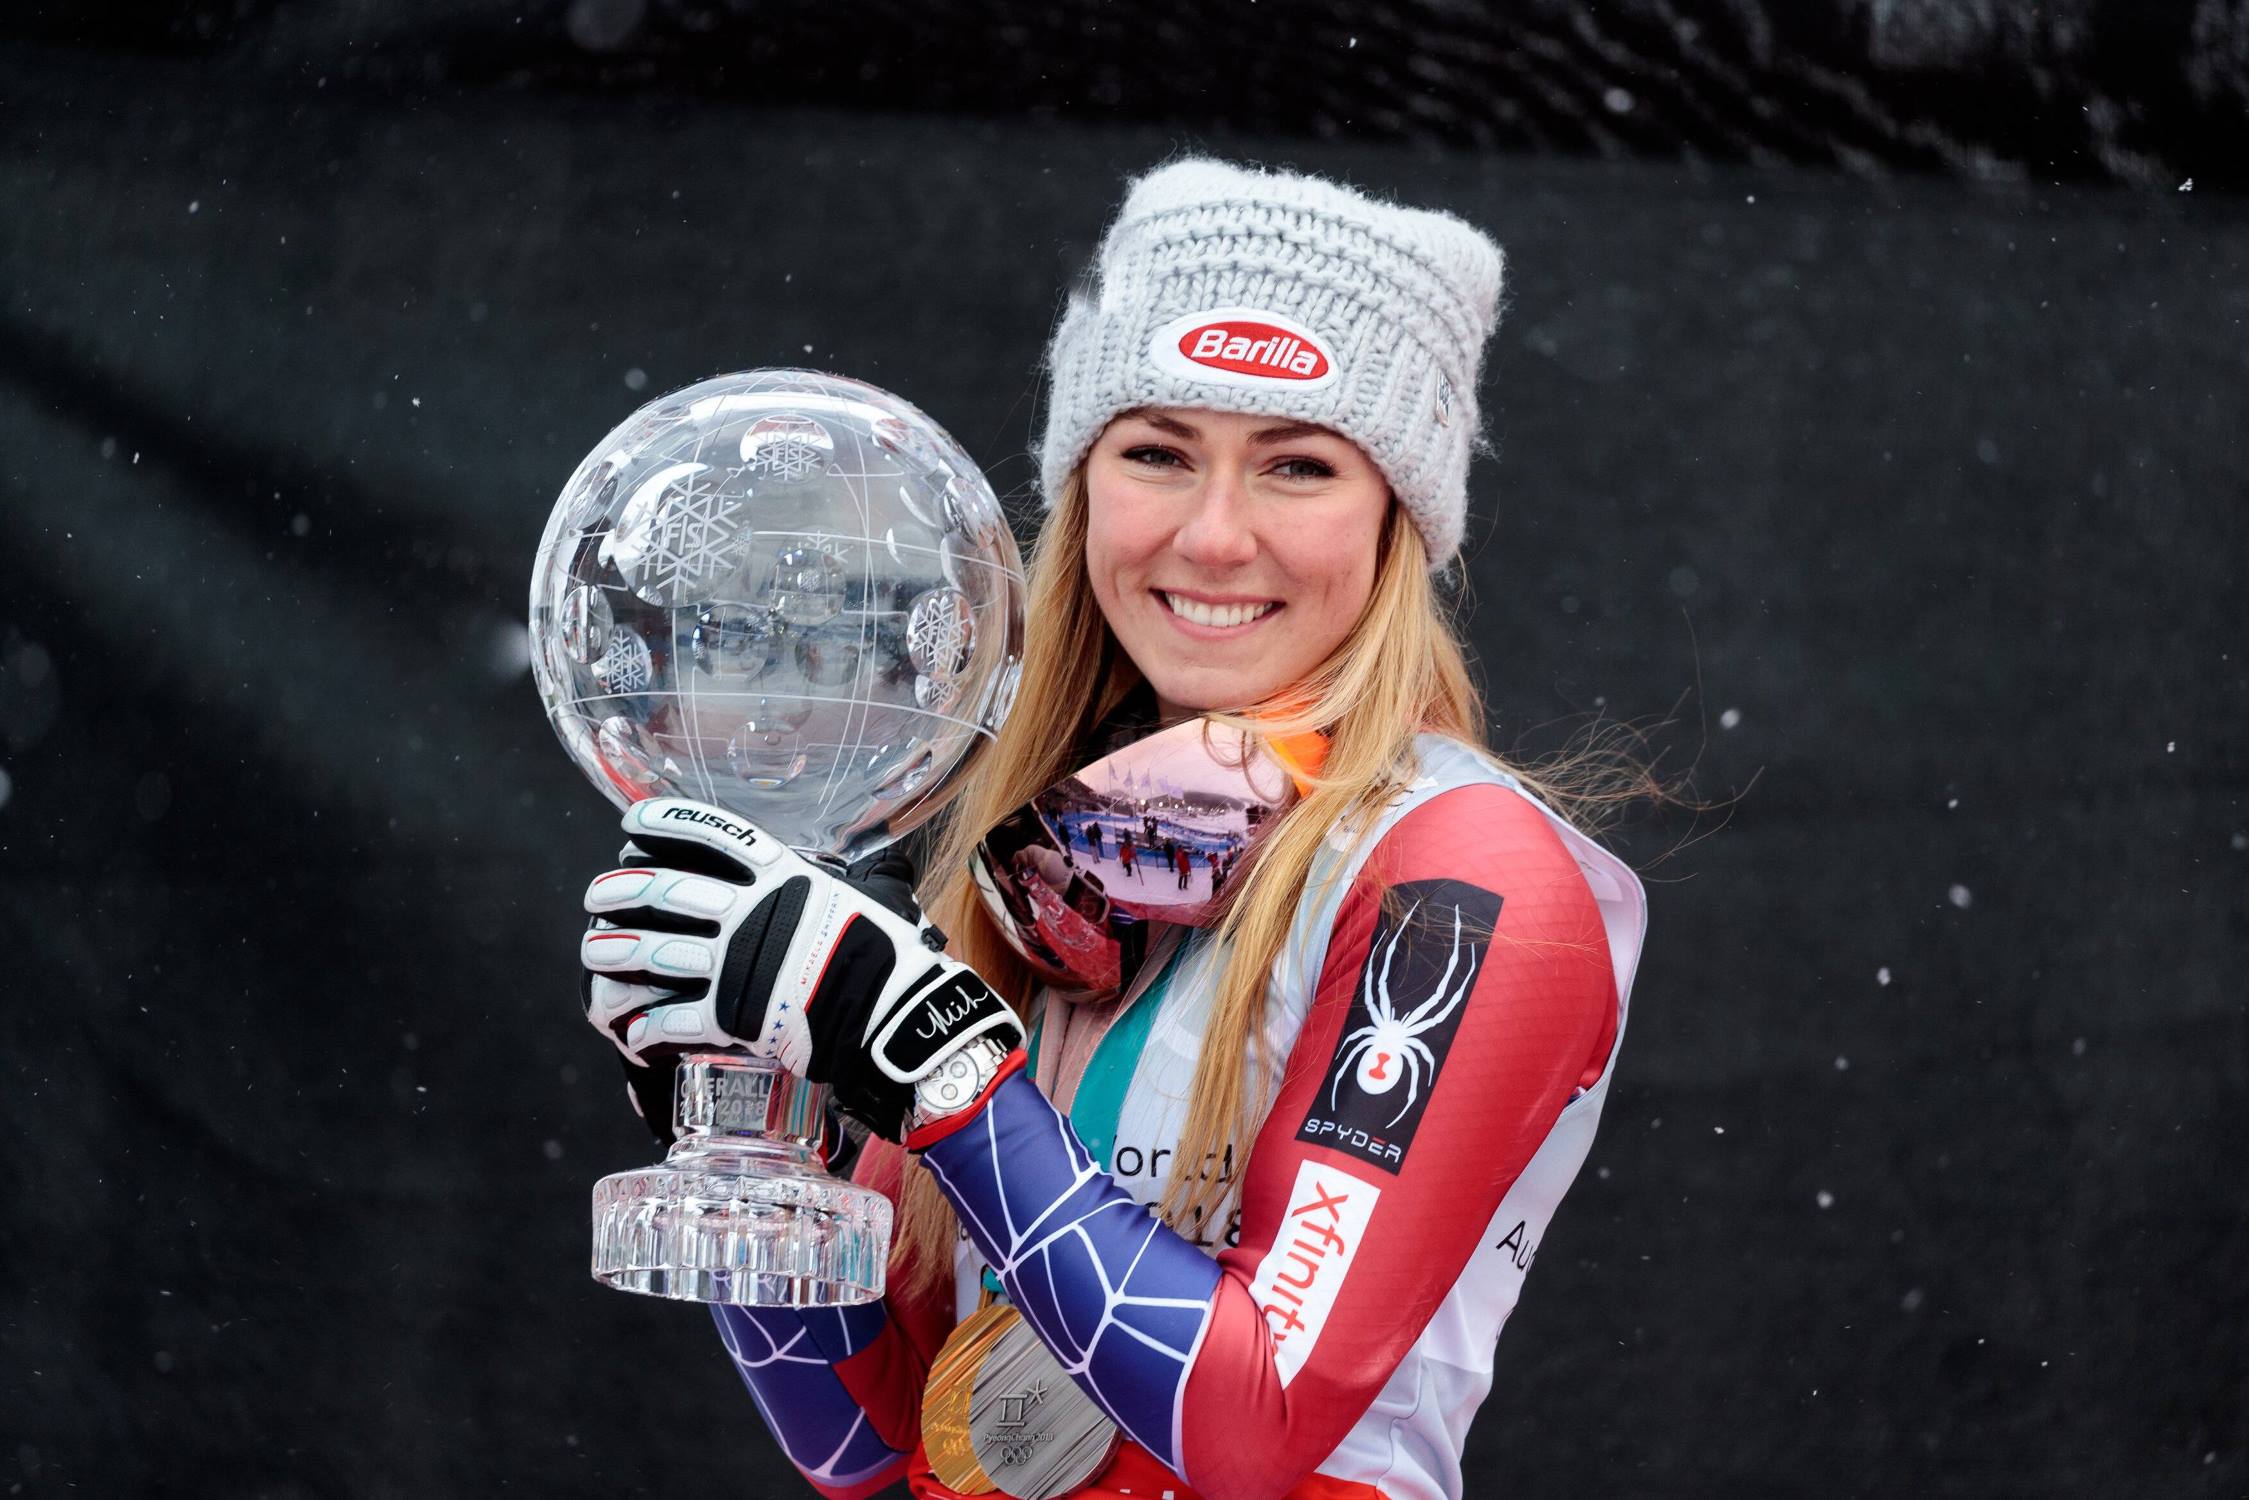 11 Surprising Facts About Mikaela Shiffrin - Facts.net